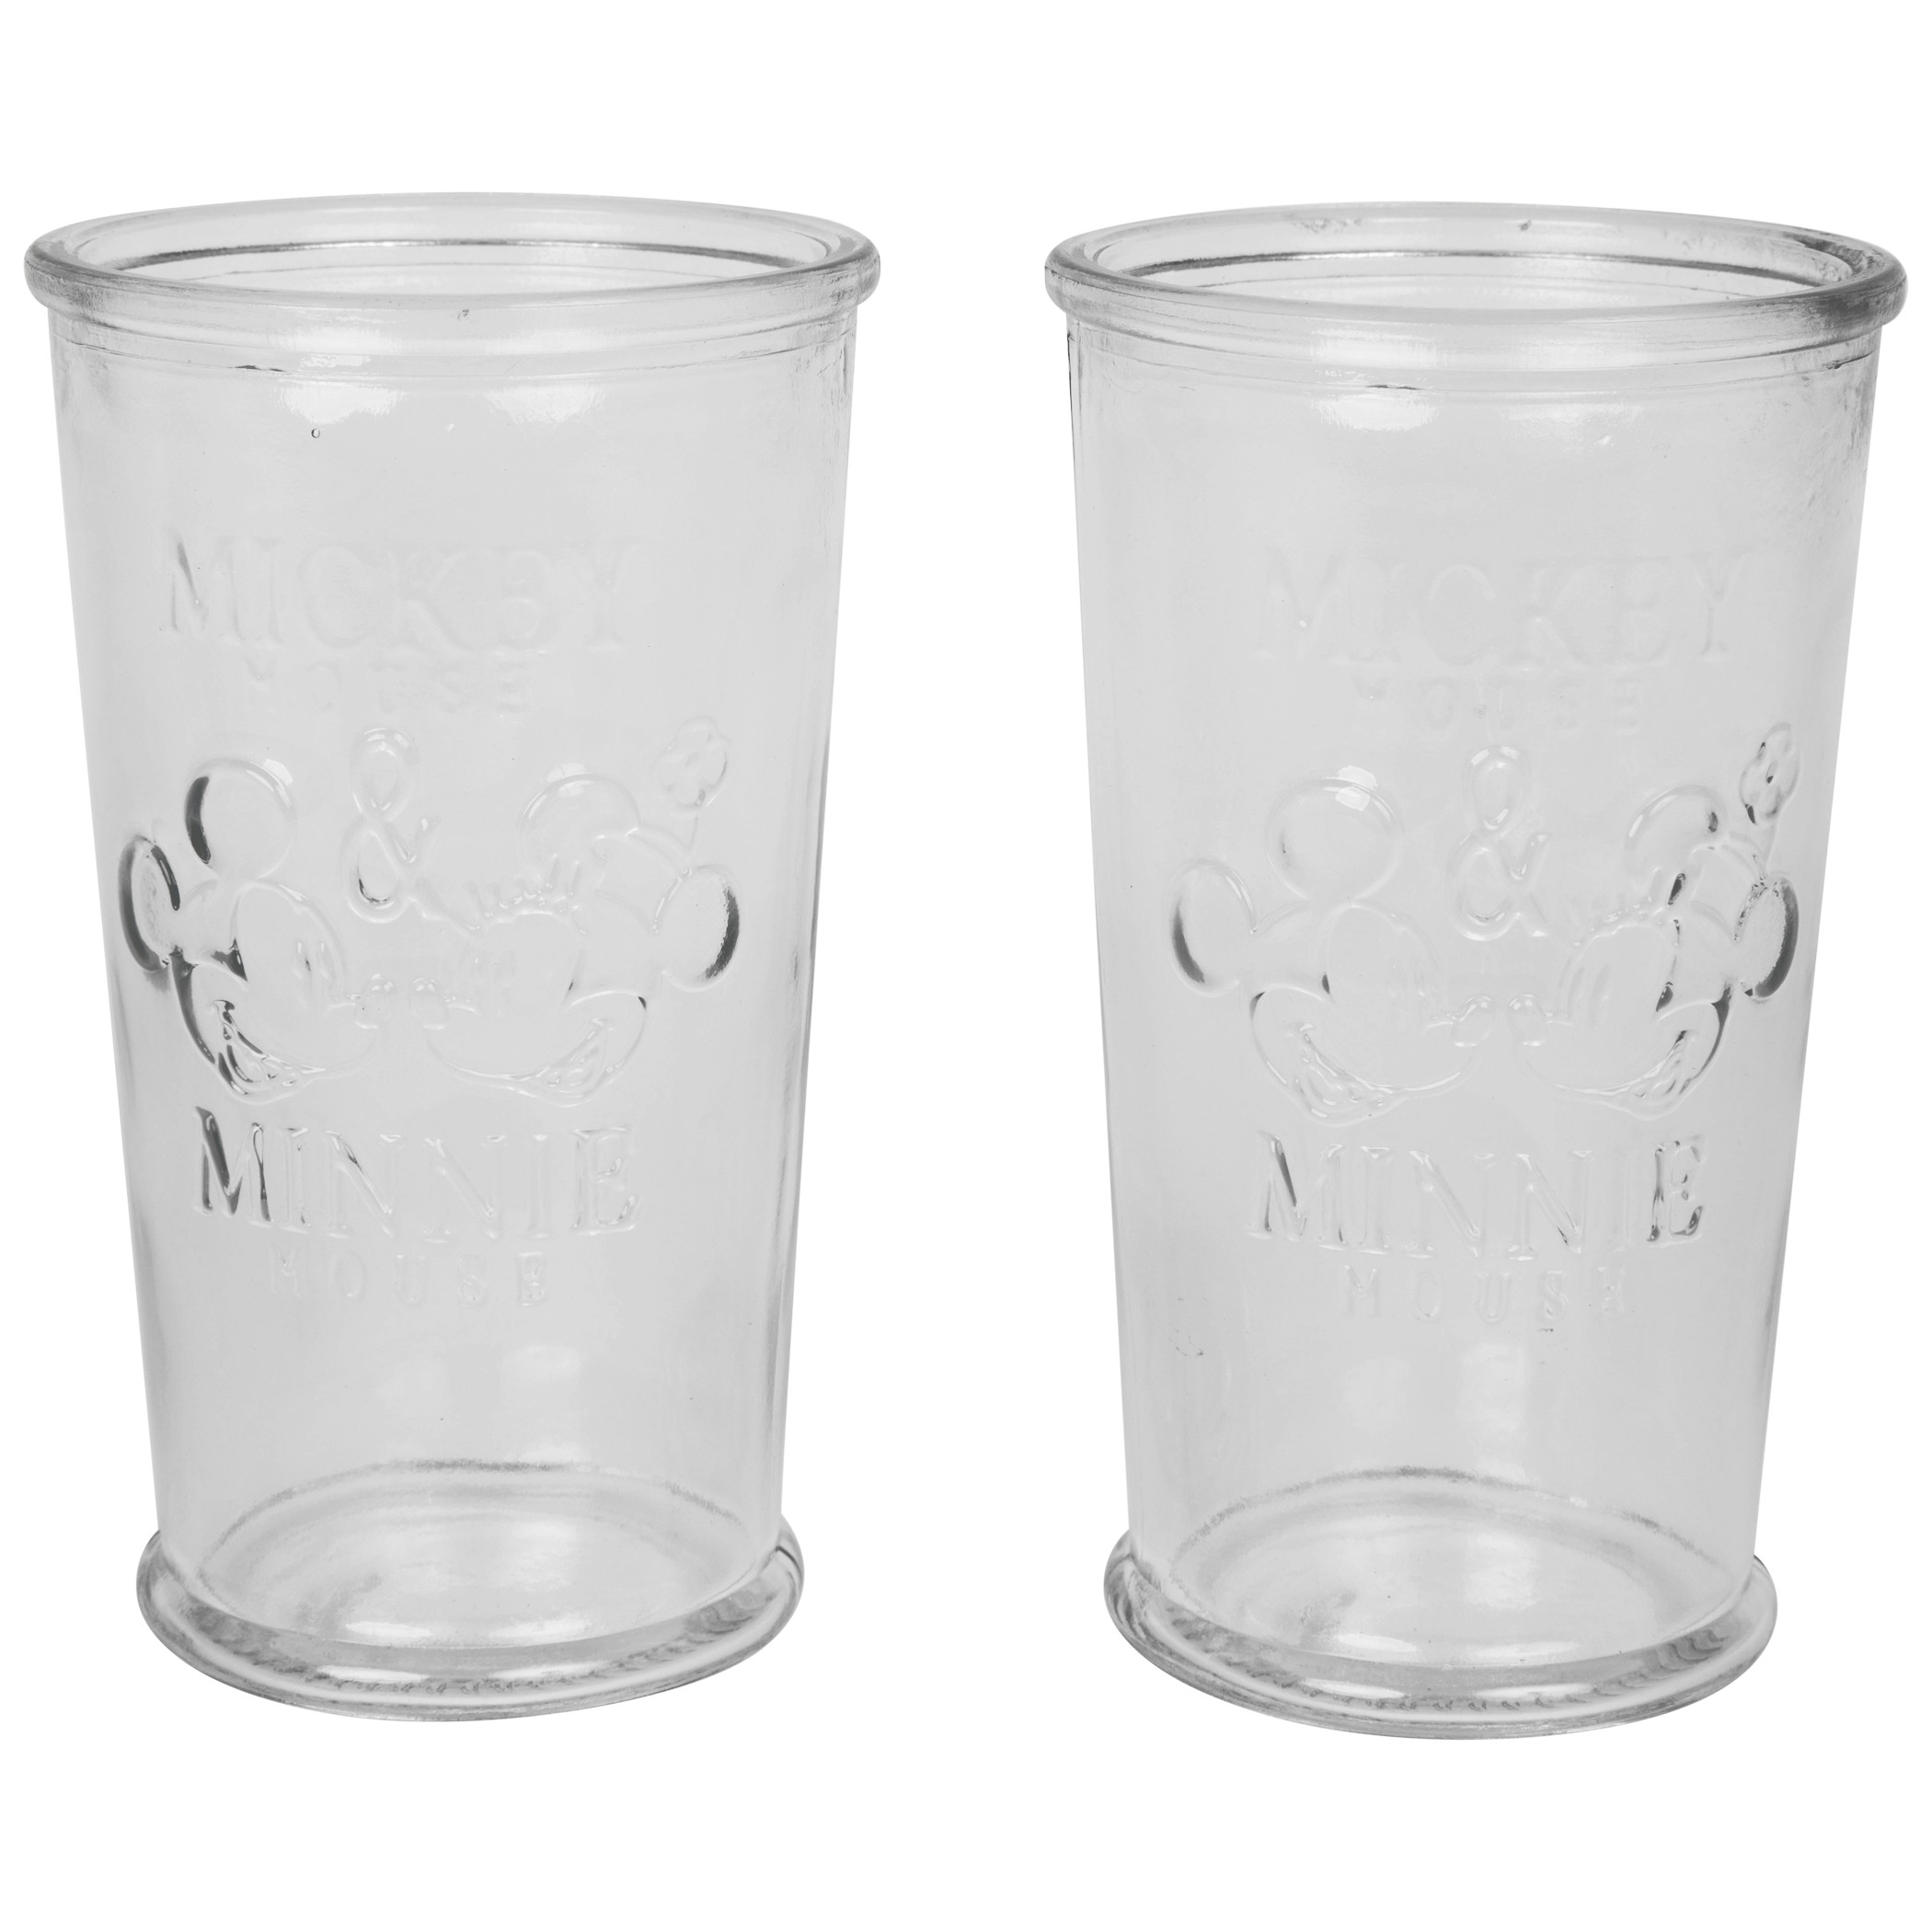 Disney Mickey and Minnie Mouse Set of 2 Clear Glasses